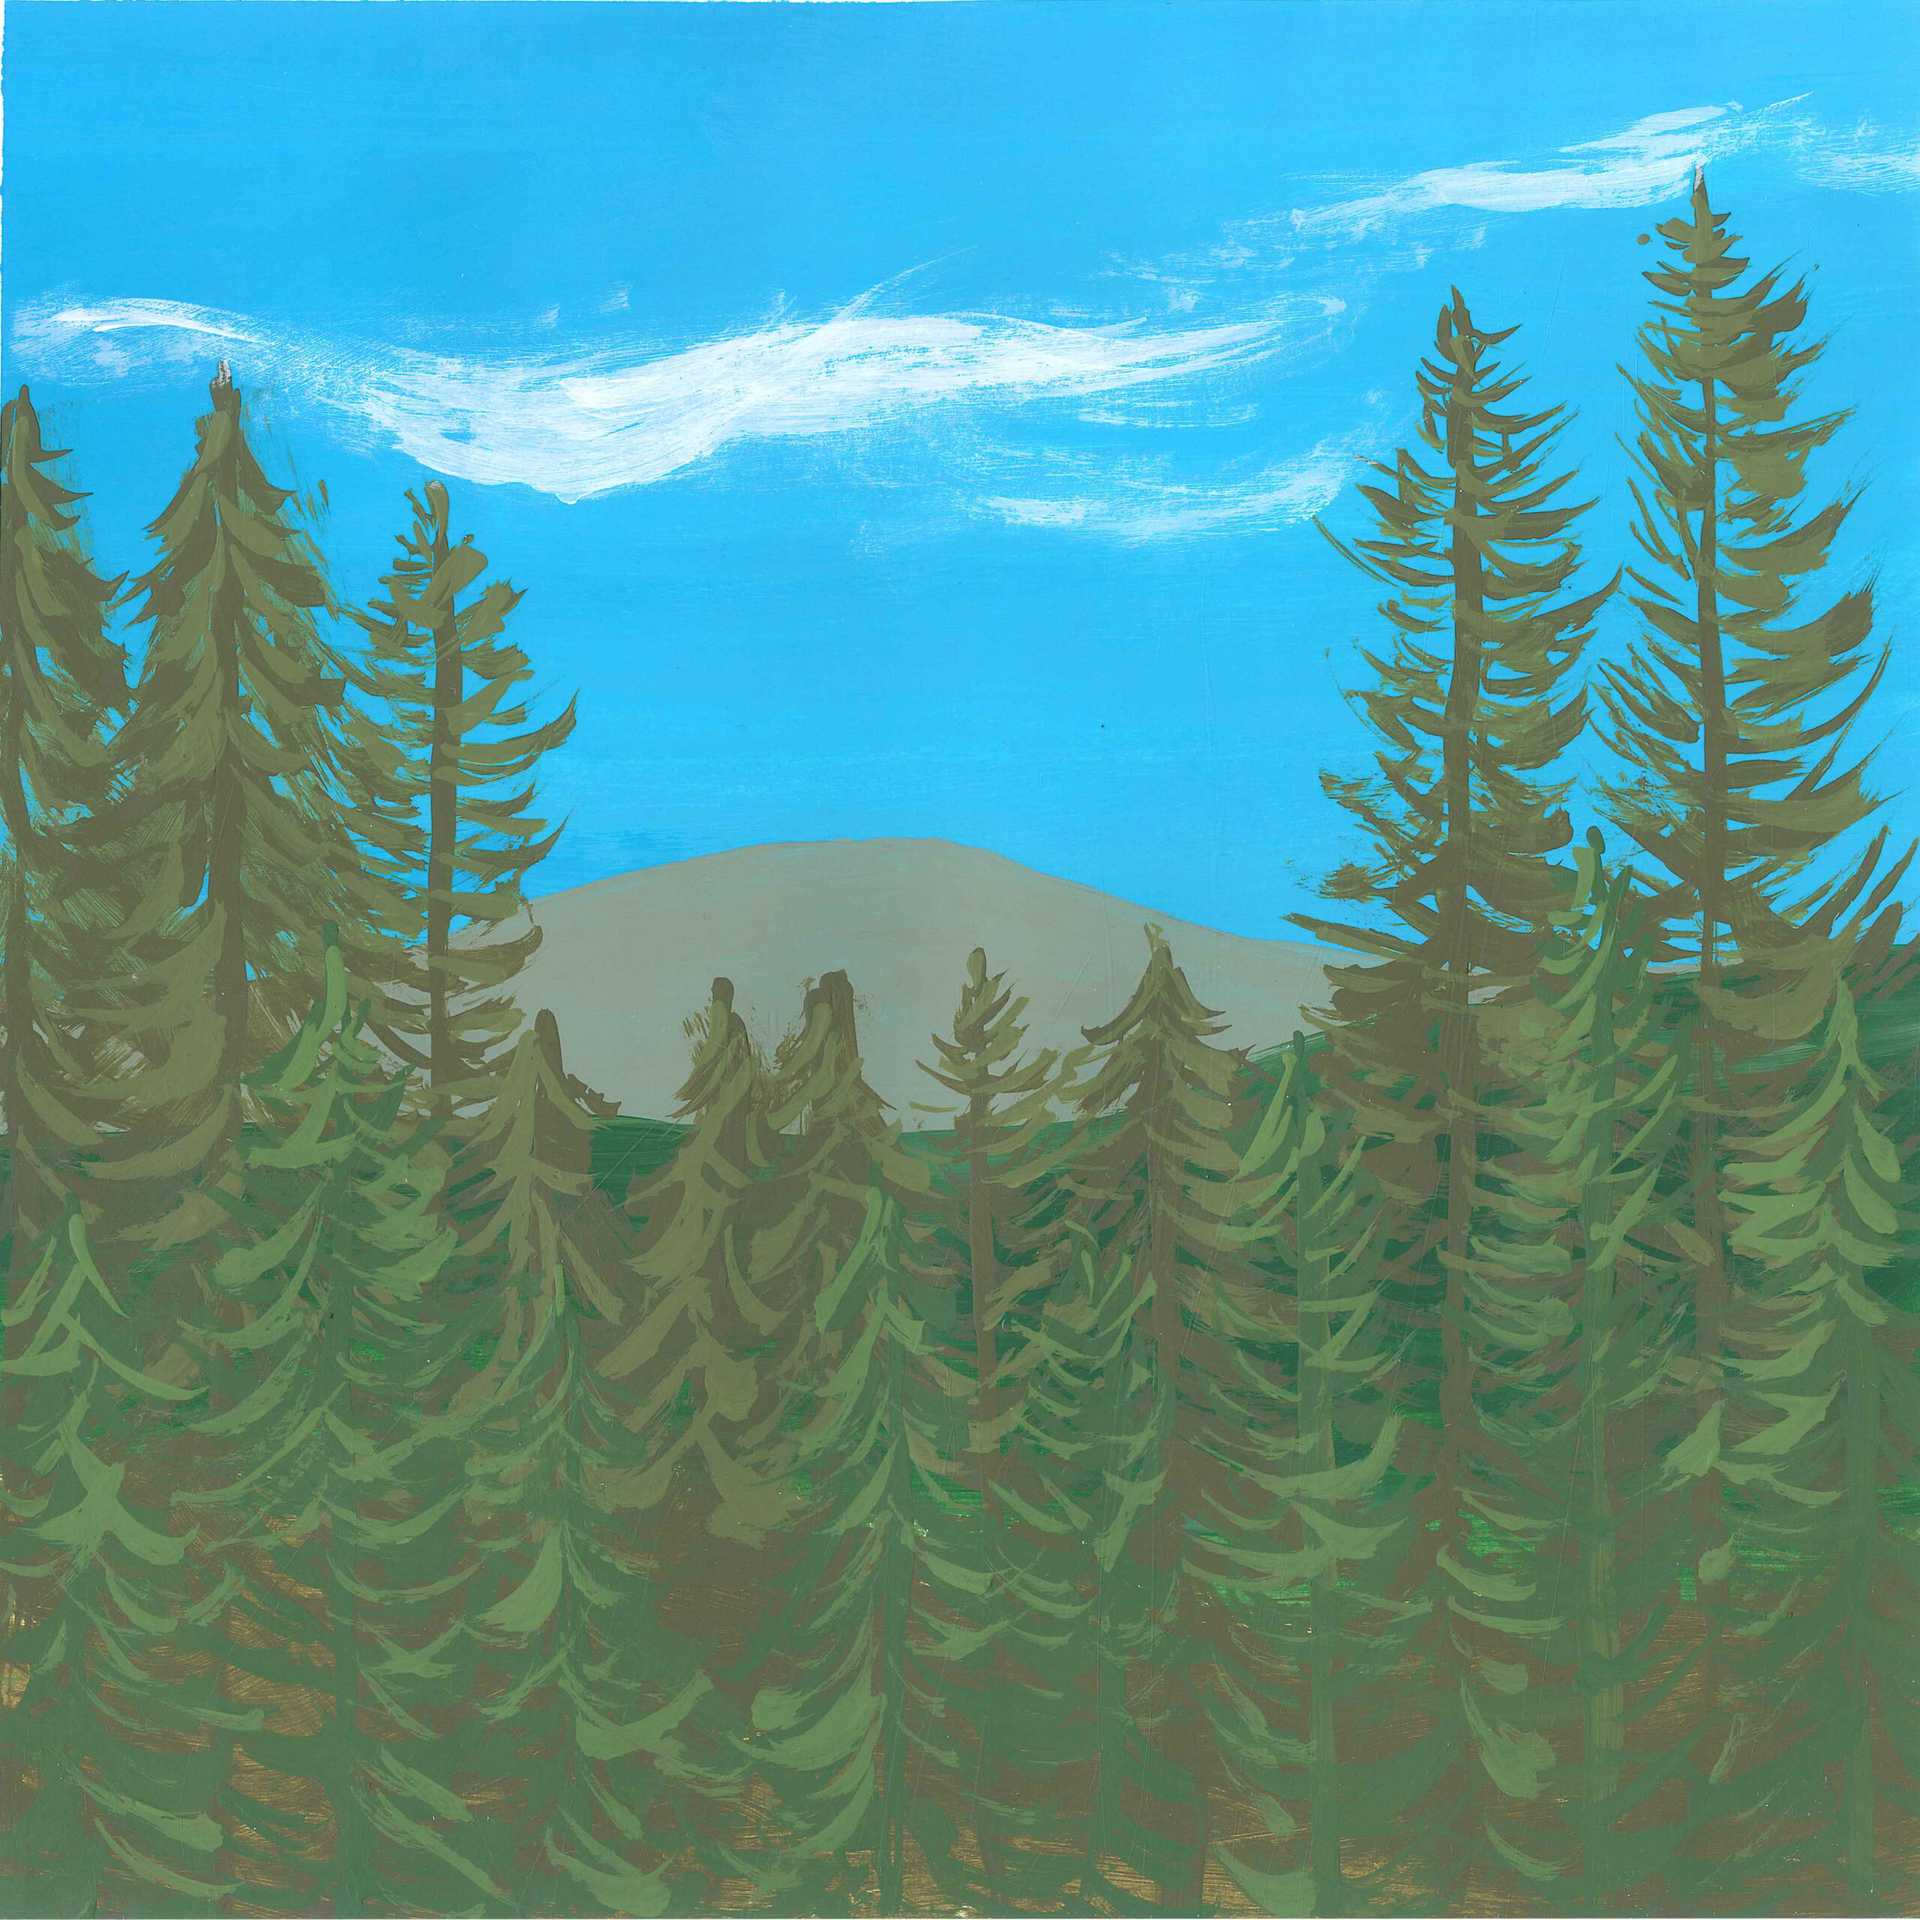 Wind in Pine Forest - nature landscape painting - earth.fm